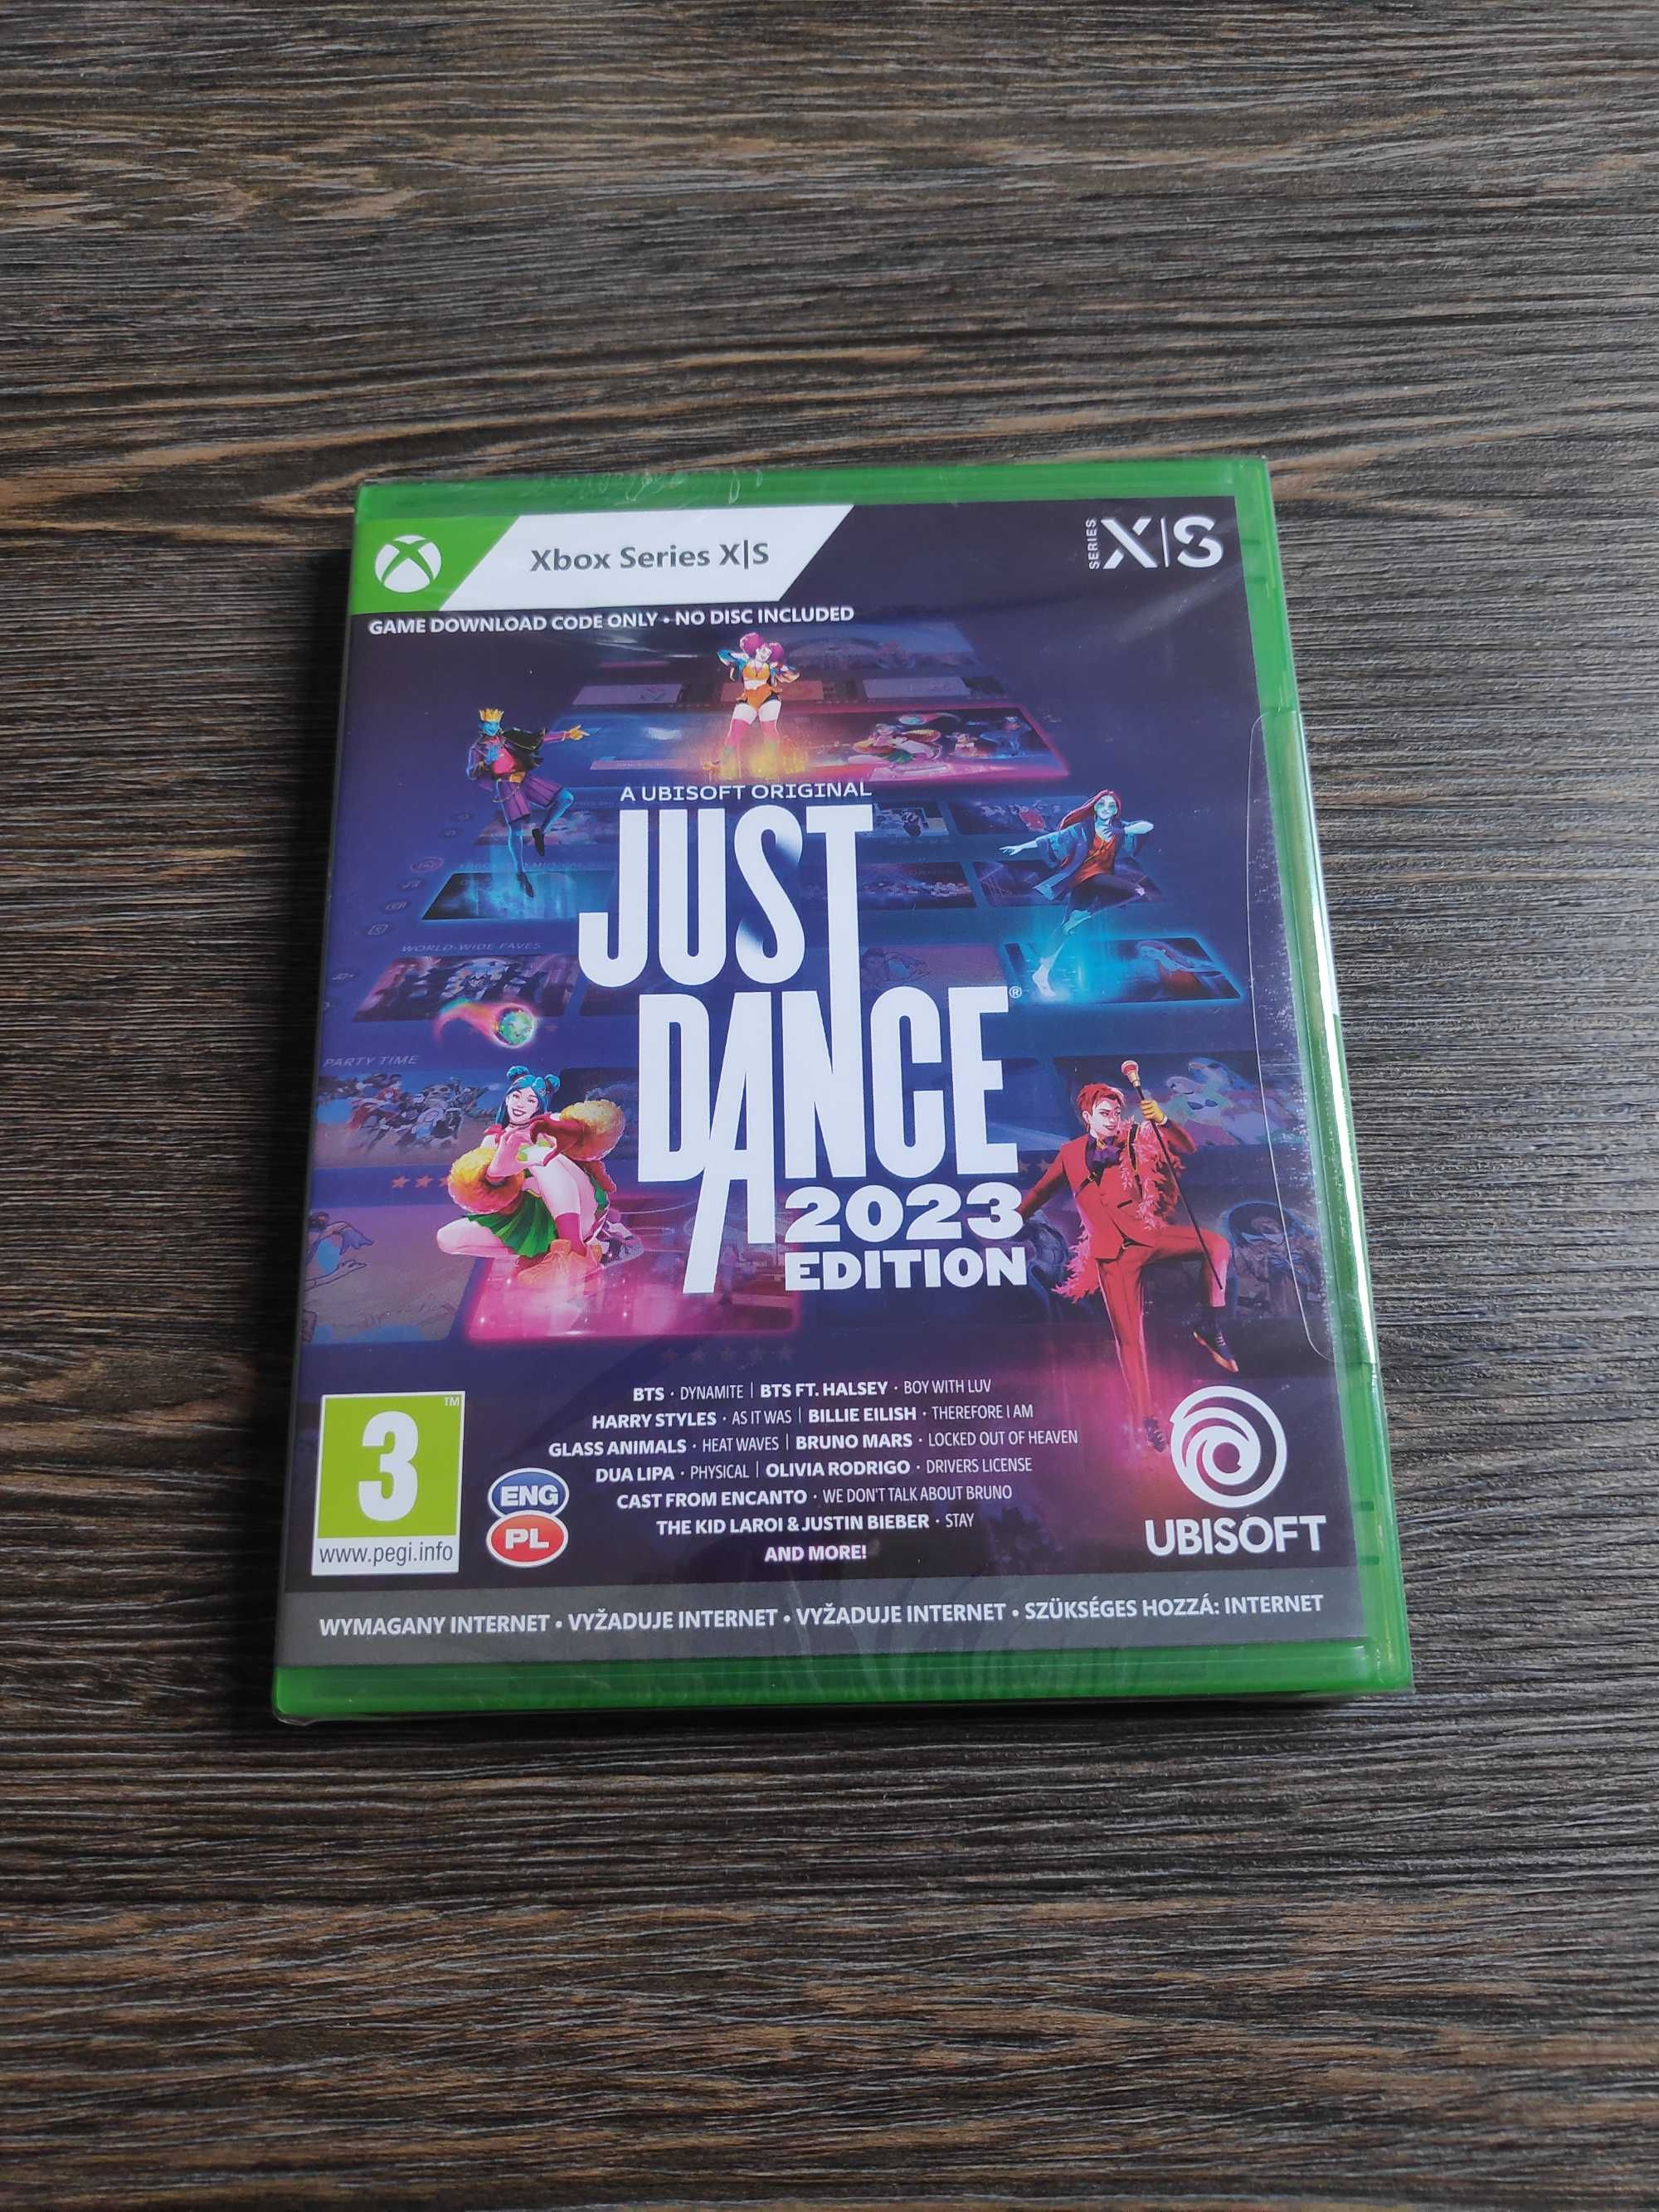 Just Dance 2023 Edition xbox series X/S